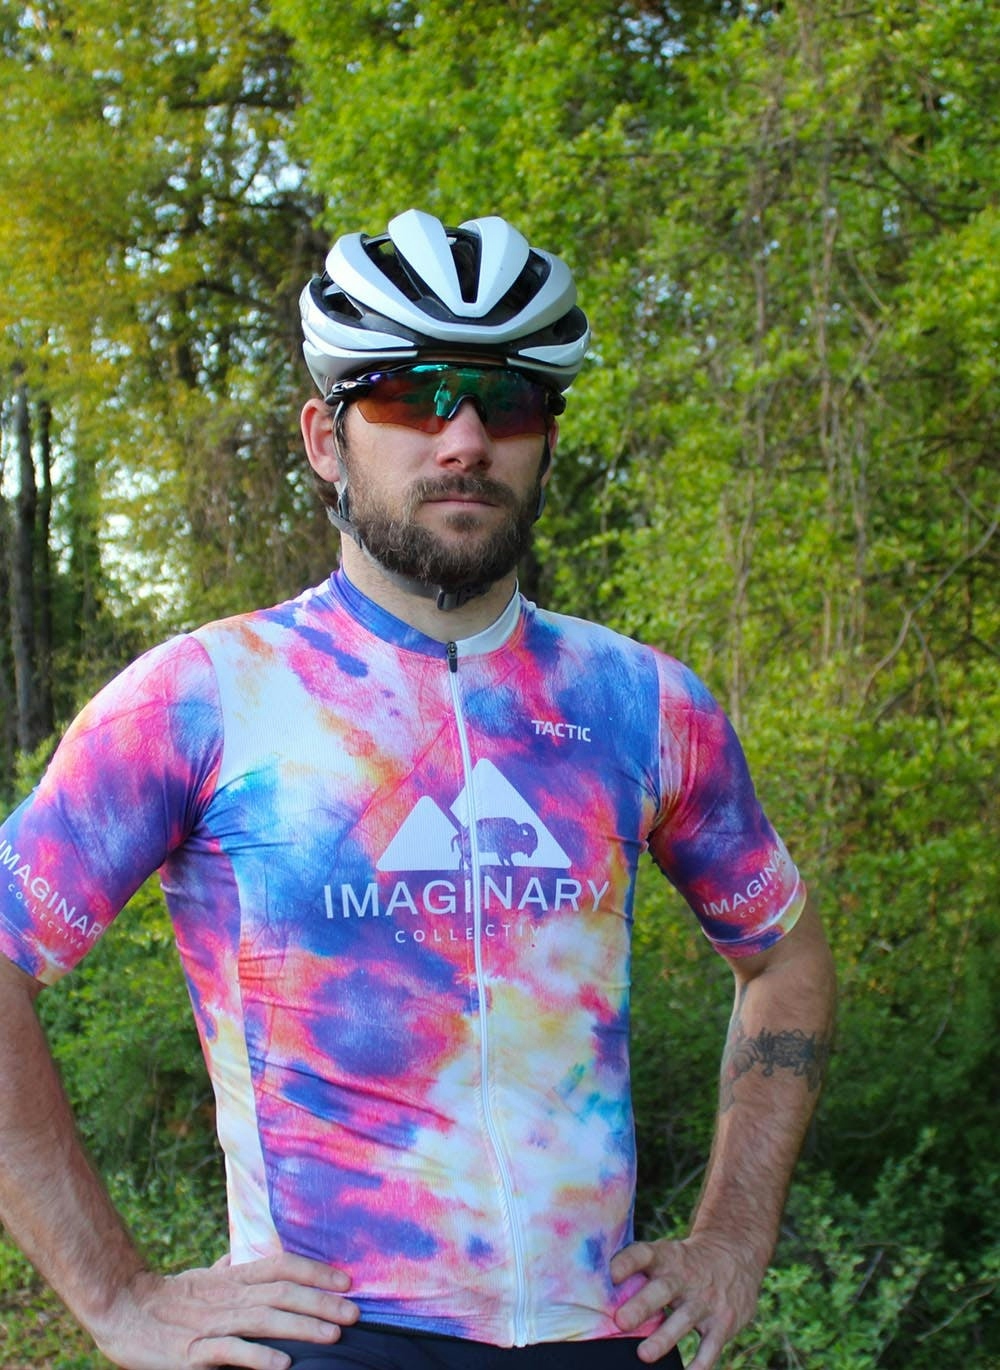 Andrew Dahlheim wearing a colorful jersey